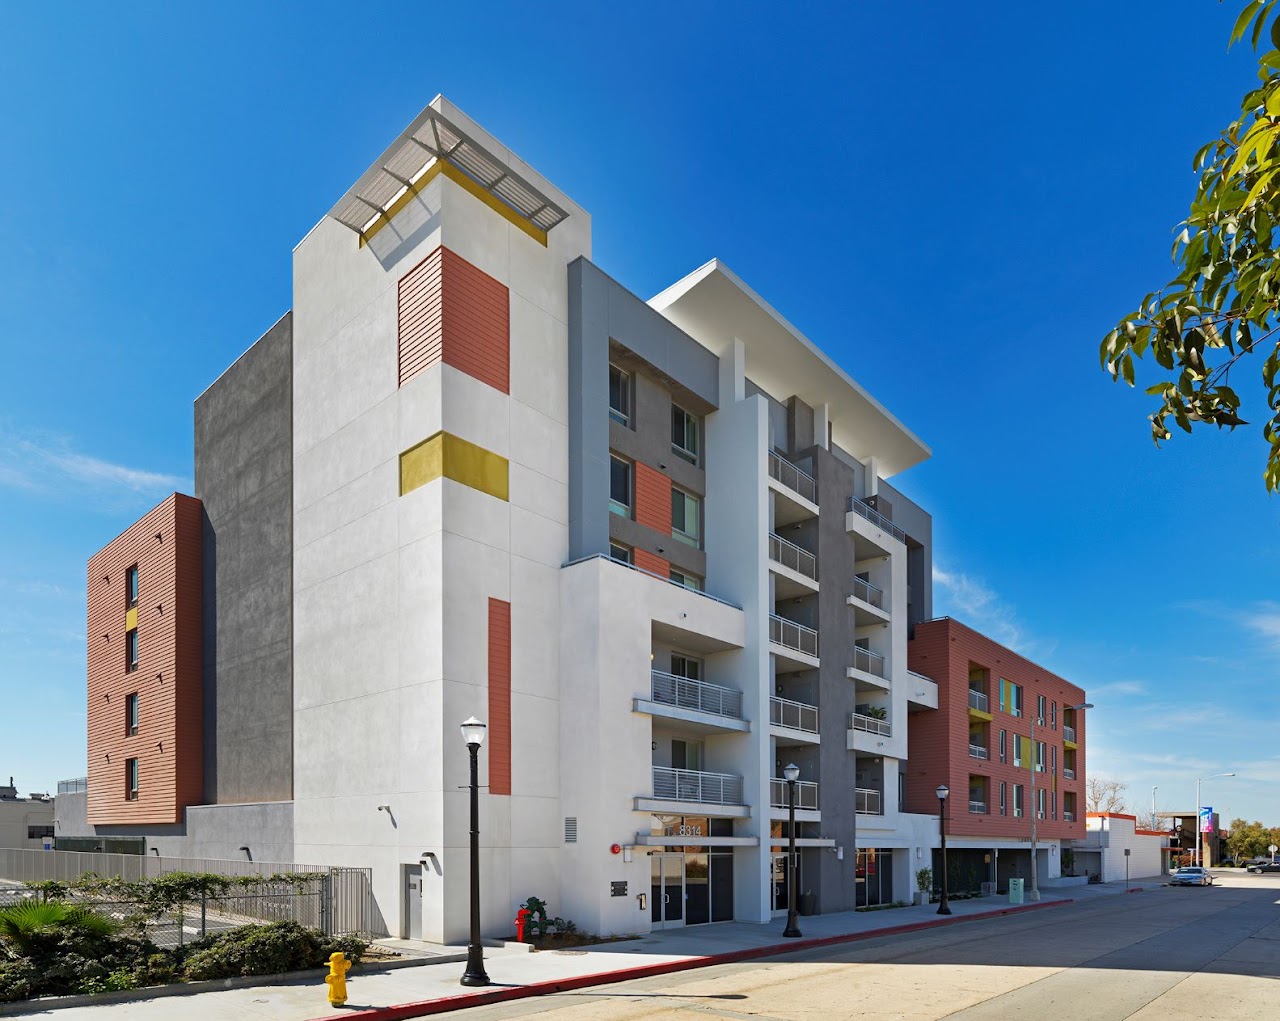 Photo of DOWNEY VIEW. Affordable housing located at 8314 2ND STREET DOWNEY, CA 90241